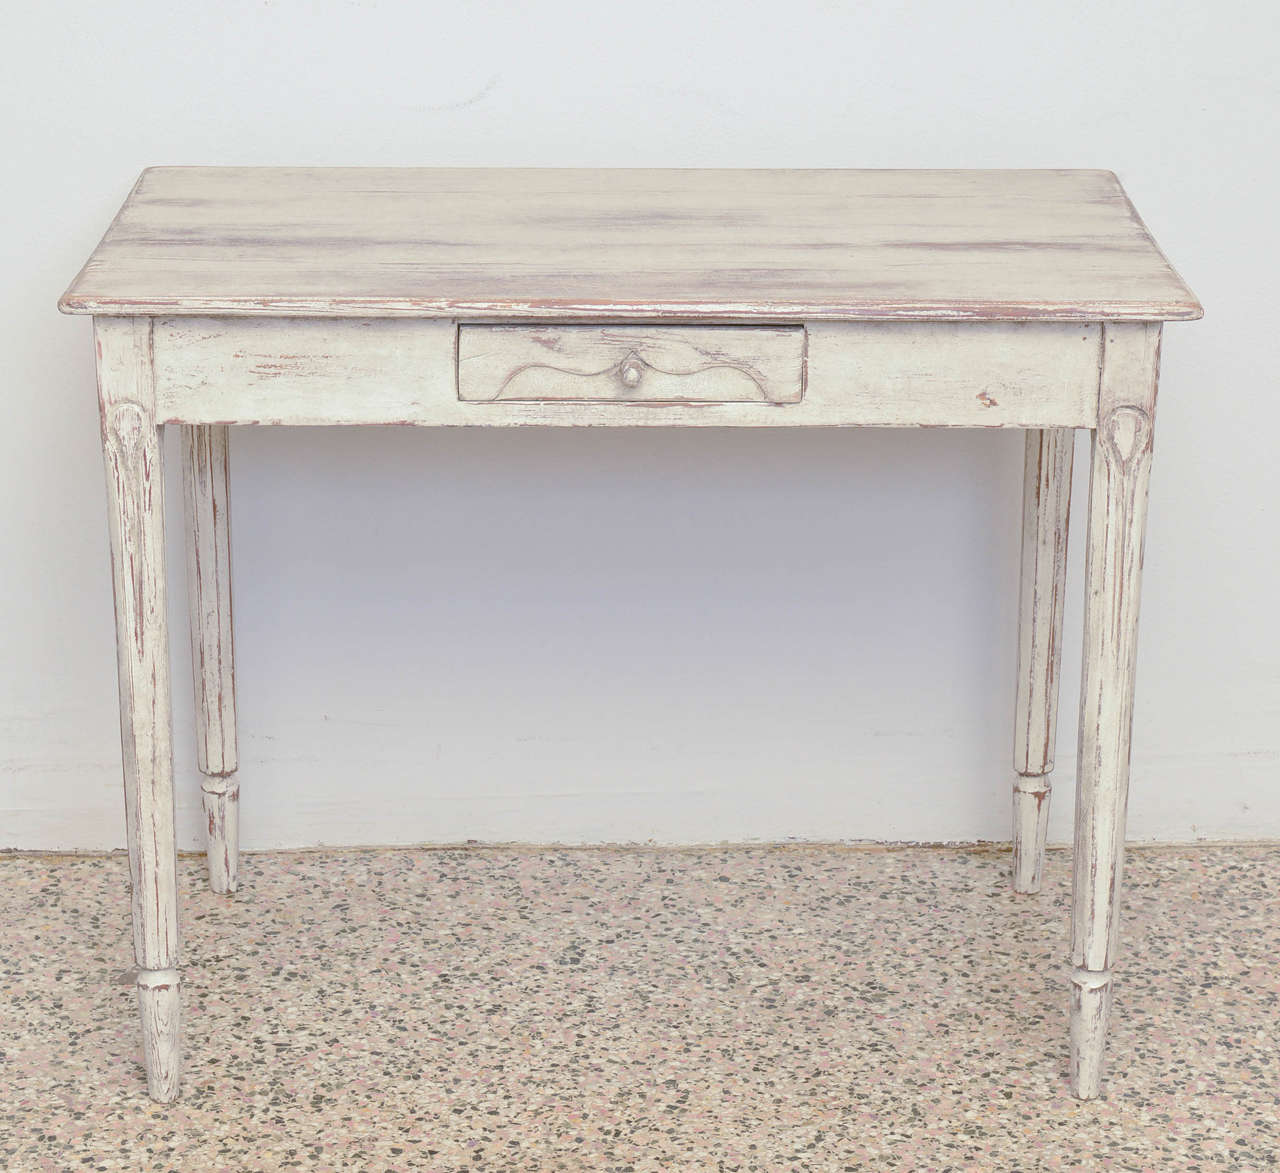 Early 19th Century Antique Swedish Gustavian Table in washed greyish green colour with three drawers, each drawer has a raised wingspan design carving and an original carved pull; there is a centre drawer at front and a drawer on each side of the